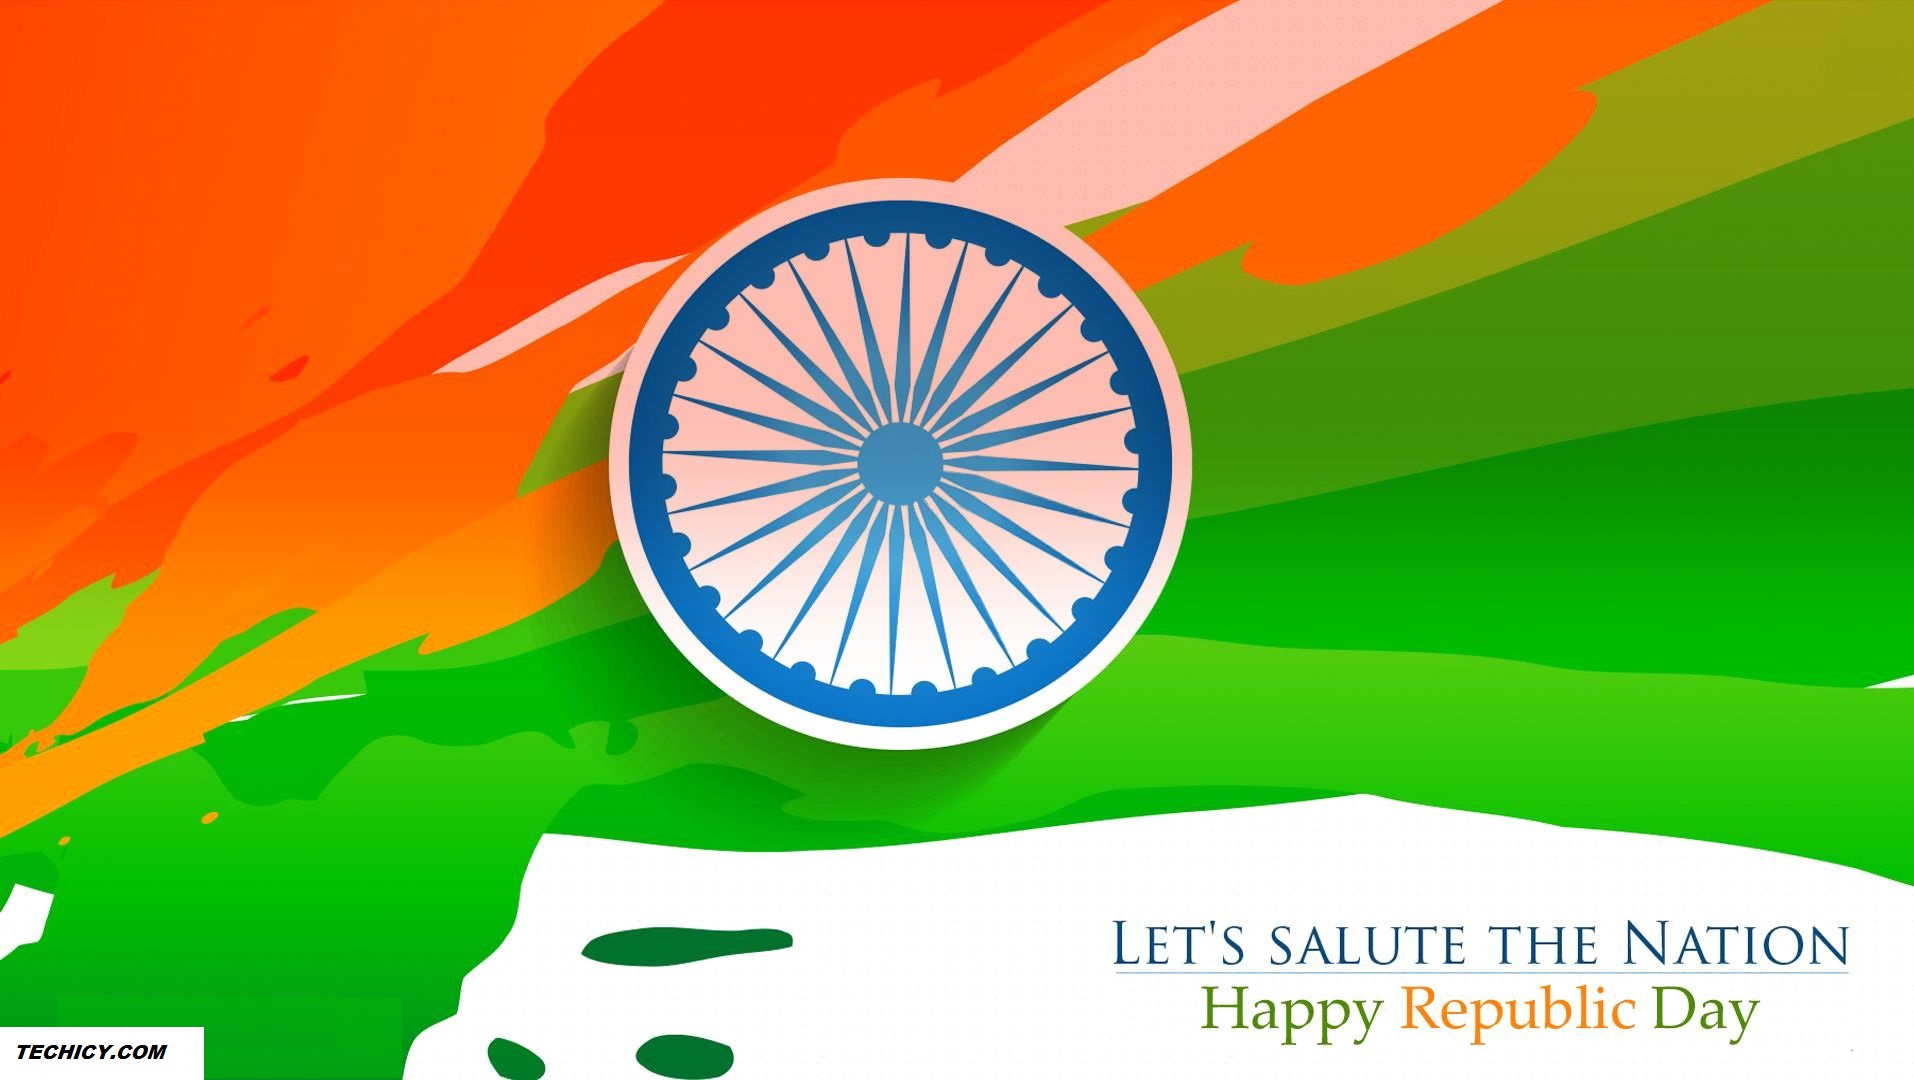 Share Republic Day Wallpapers to Stay Motivated 